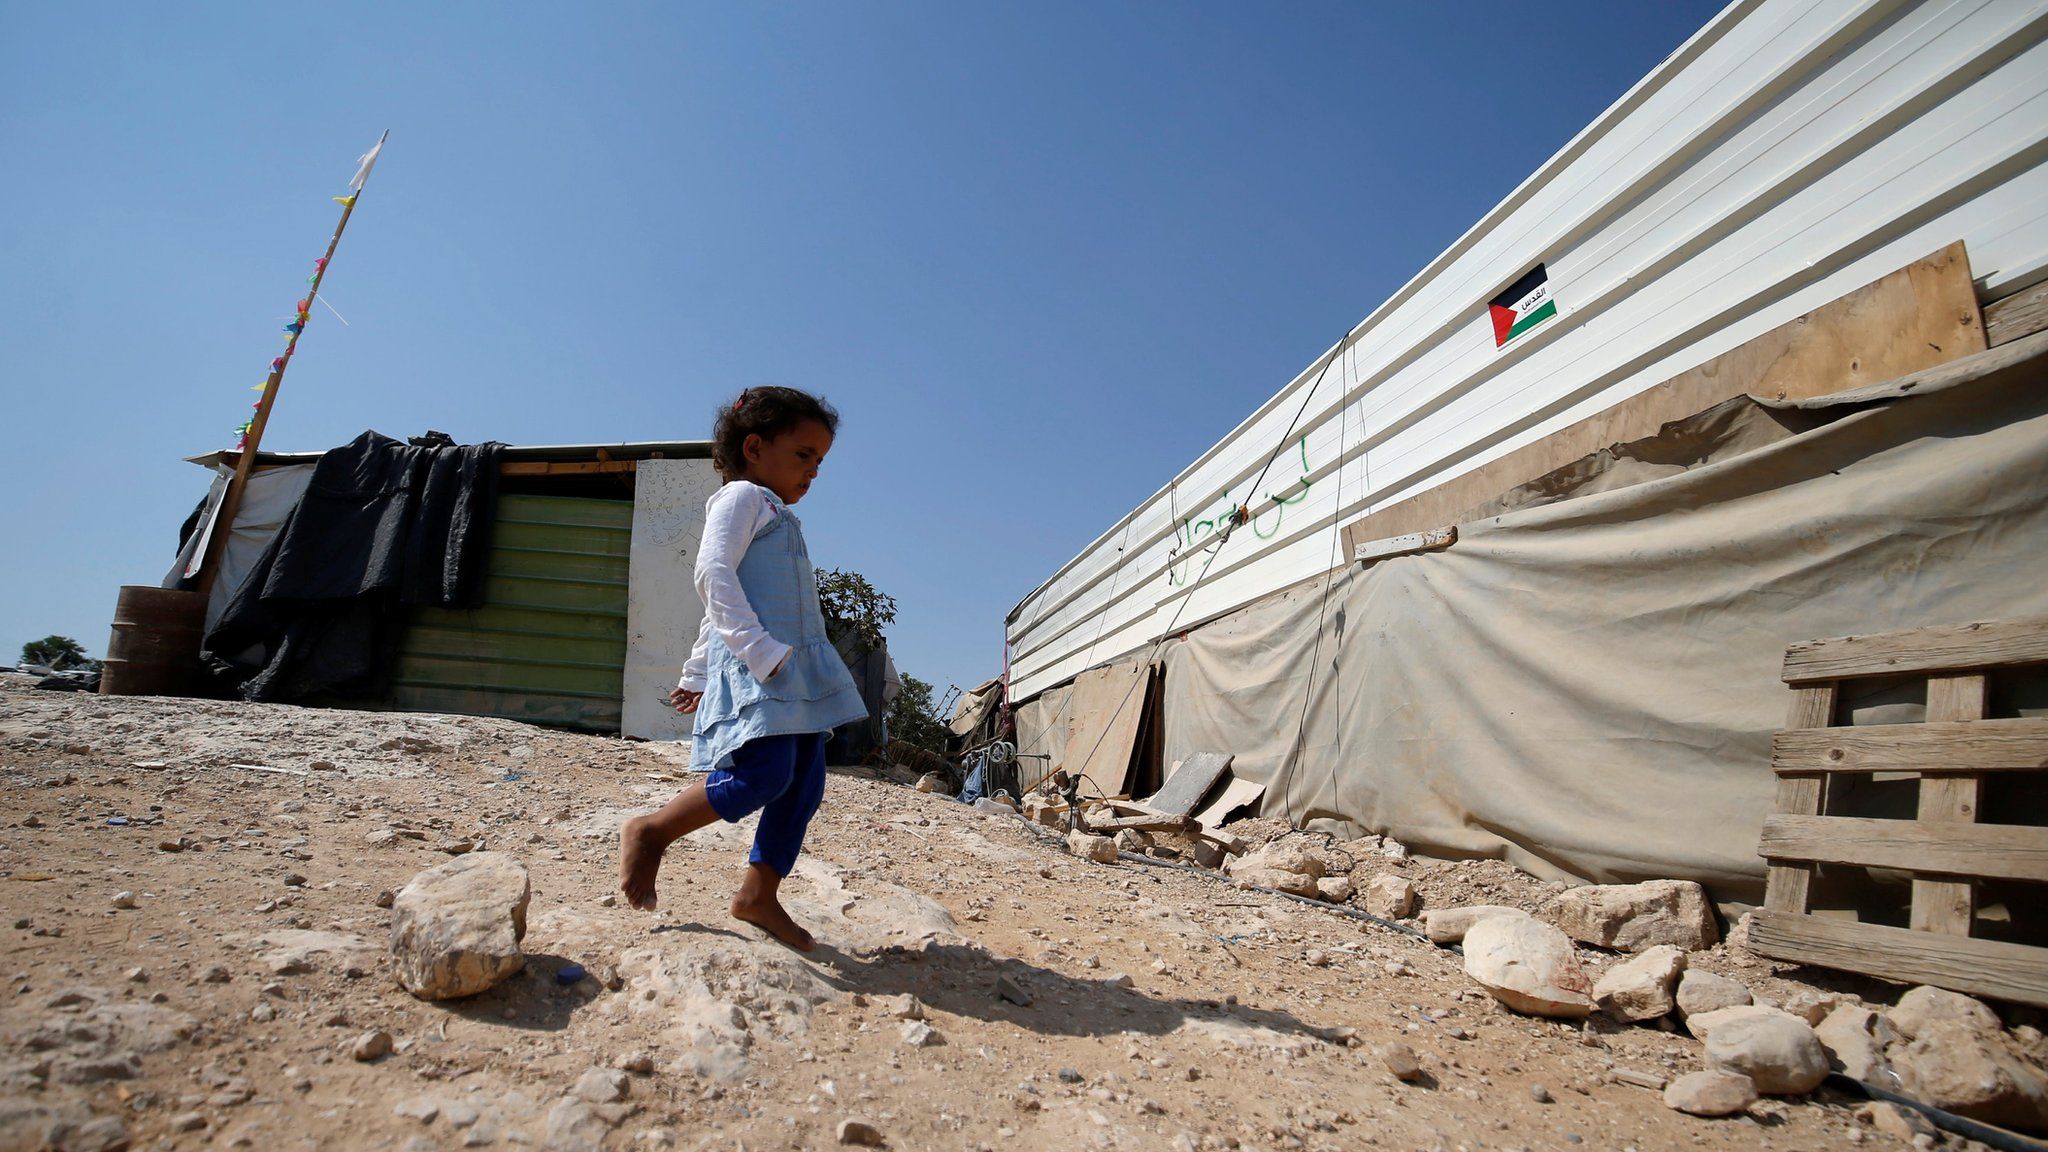 A girl walks outside her home in the Bedouin village of Khan al-Ahmar, in the occupied West Bank (5 September 2018)